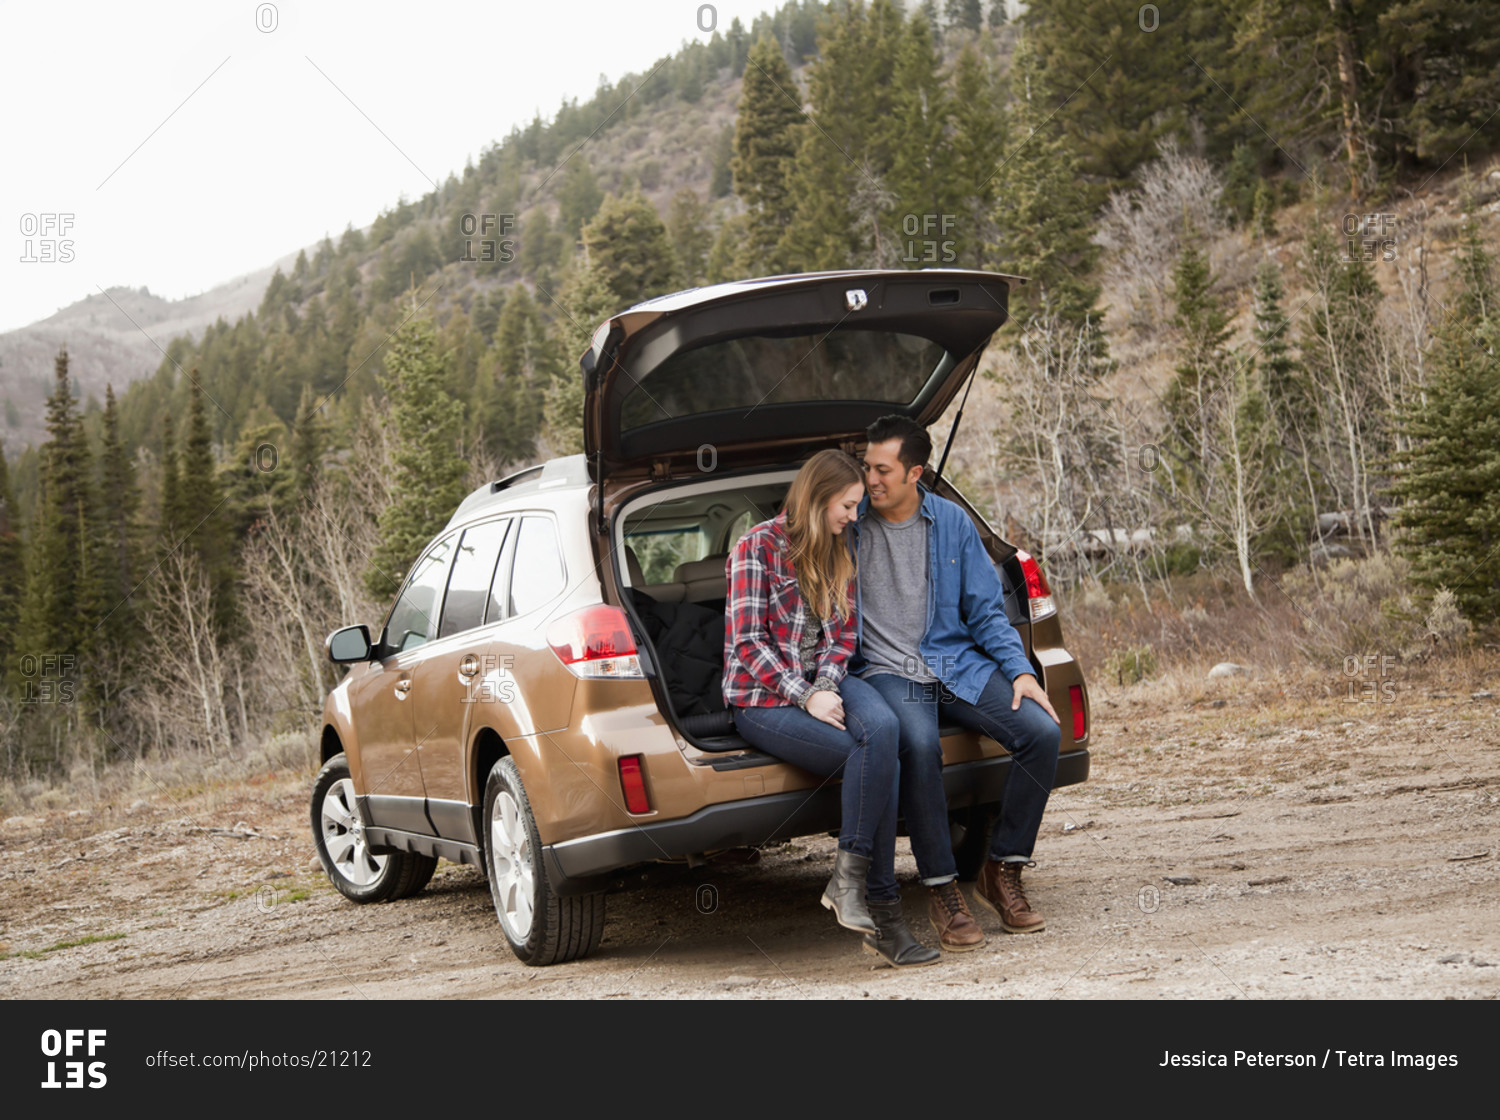 Portrait of young couple sitting in car trunk in non-urban scene